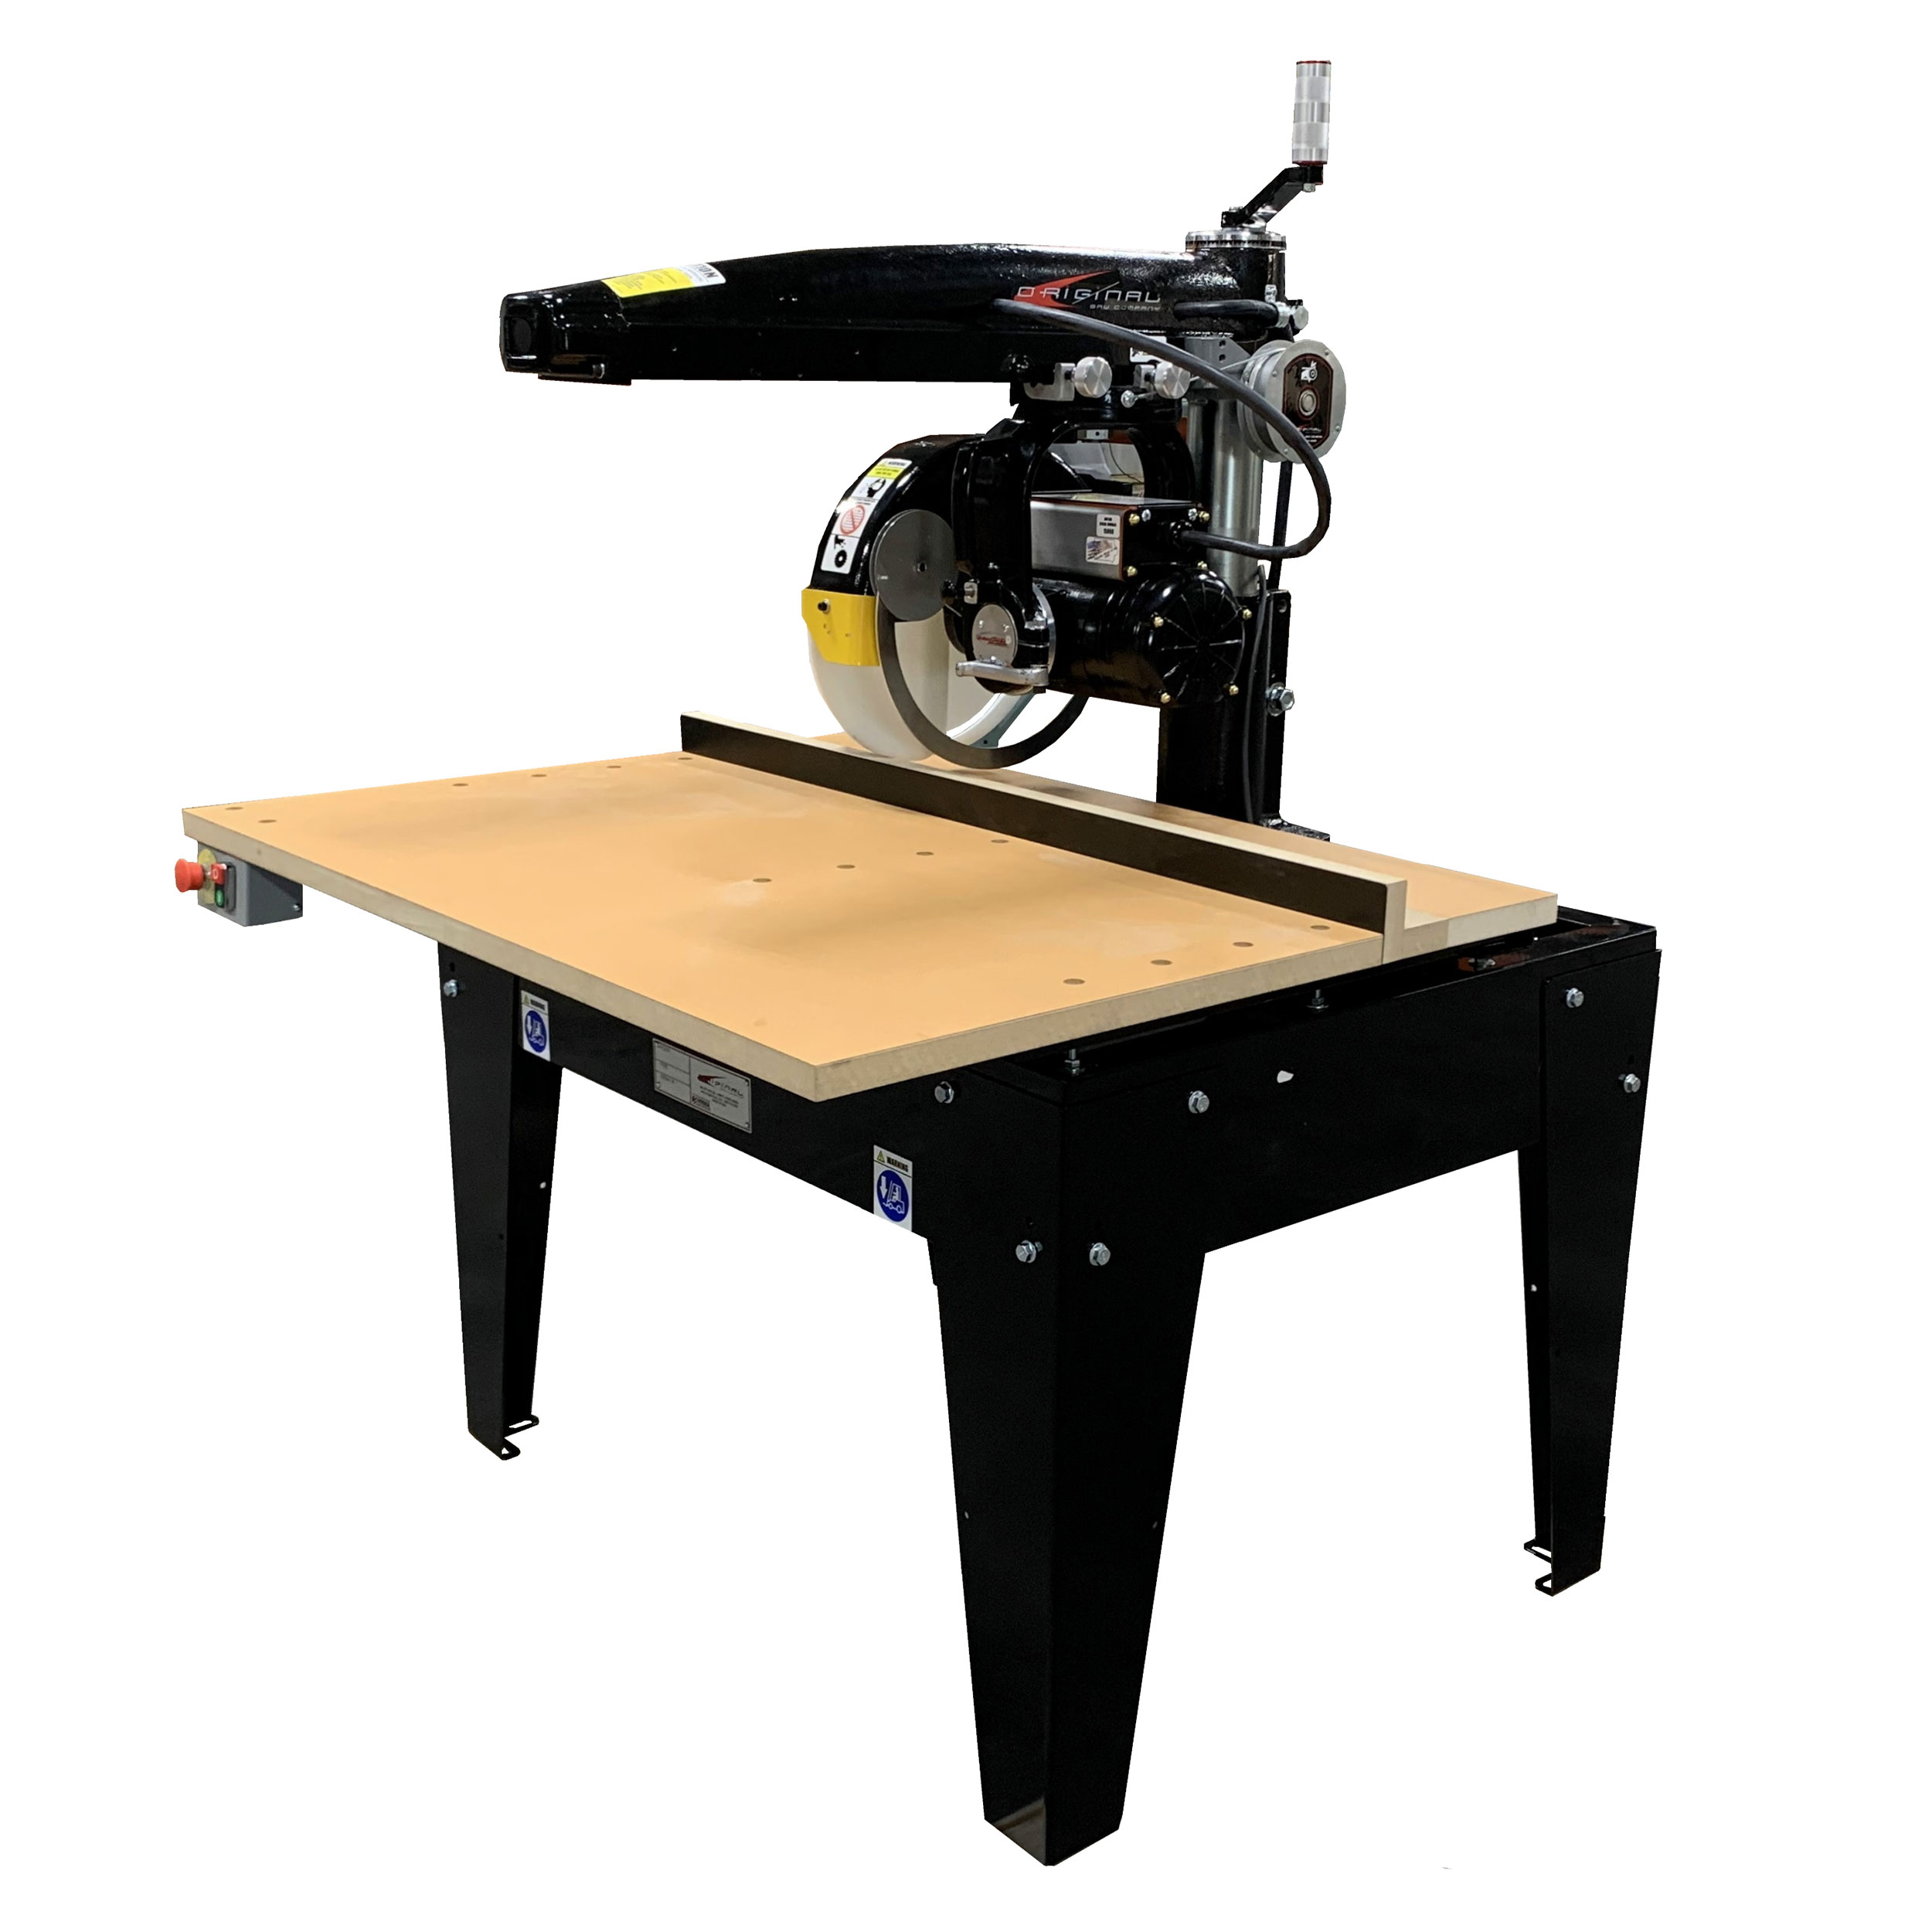 Radial Arm Saw With 16" Blade And 16" Crosscut, 5hp 3 Phase 460v